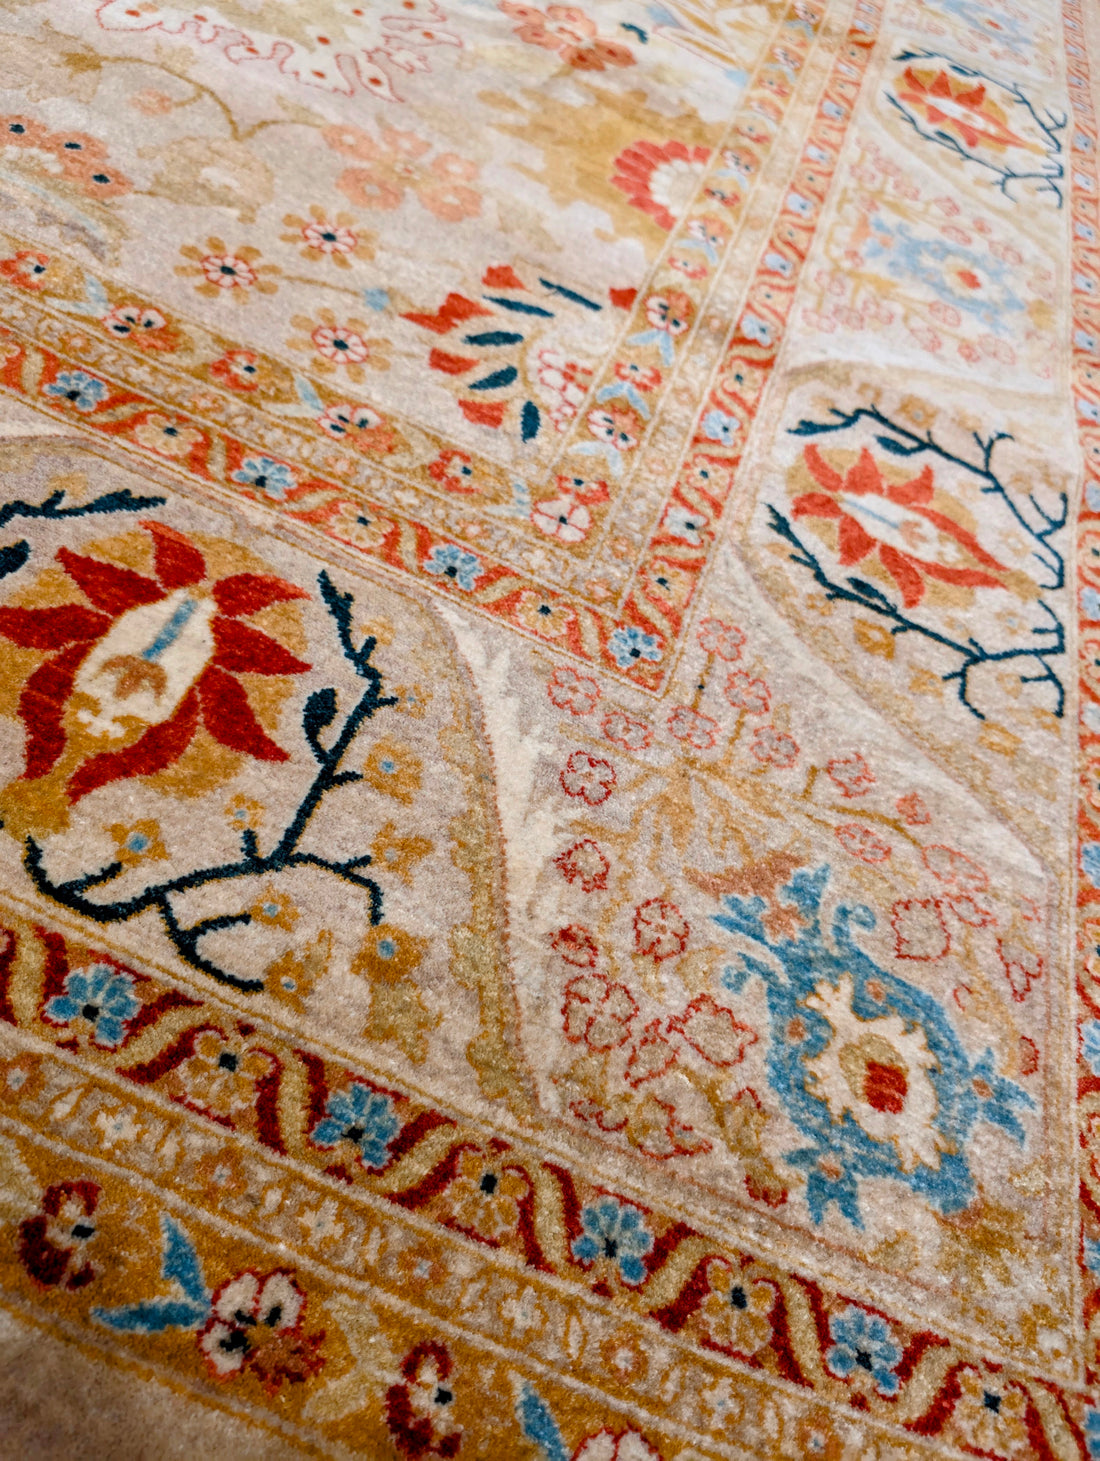 What is the light and dark side of a hand-knotted rug?